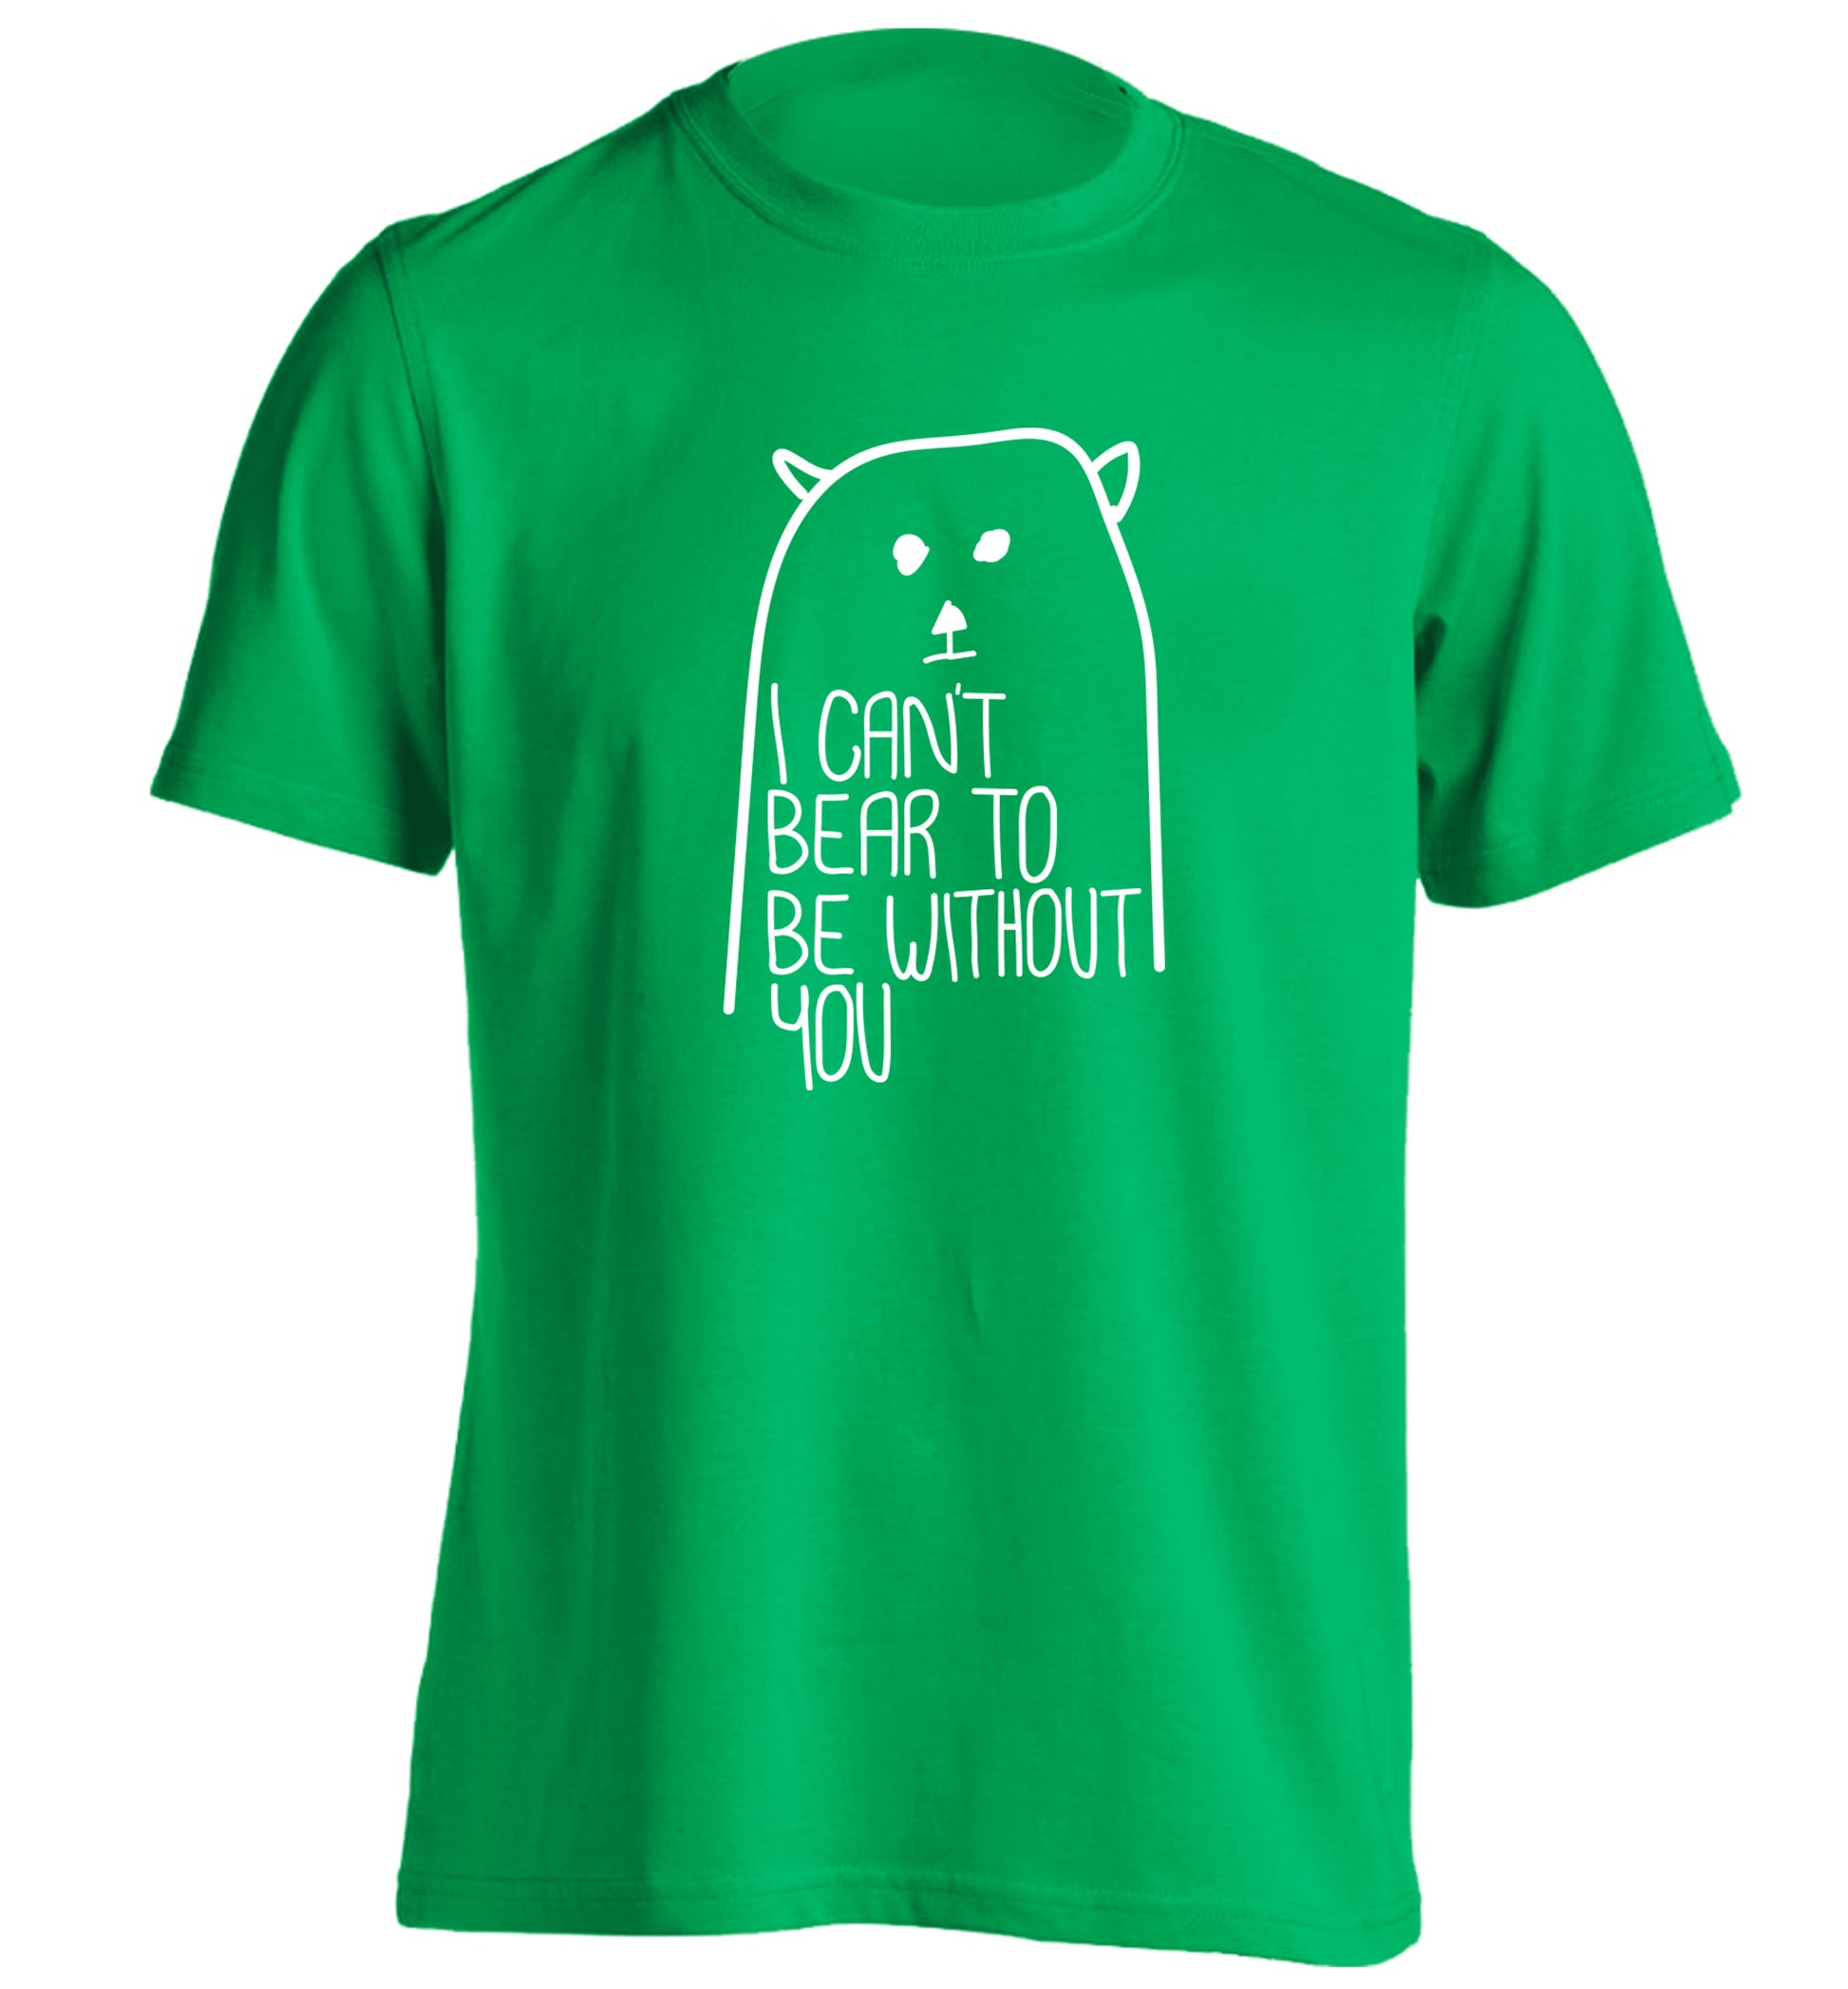 I can't bear to be without you adults unisex green Tshirt 2XL